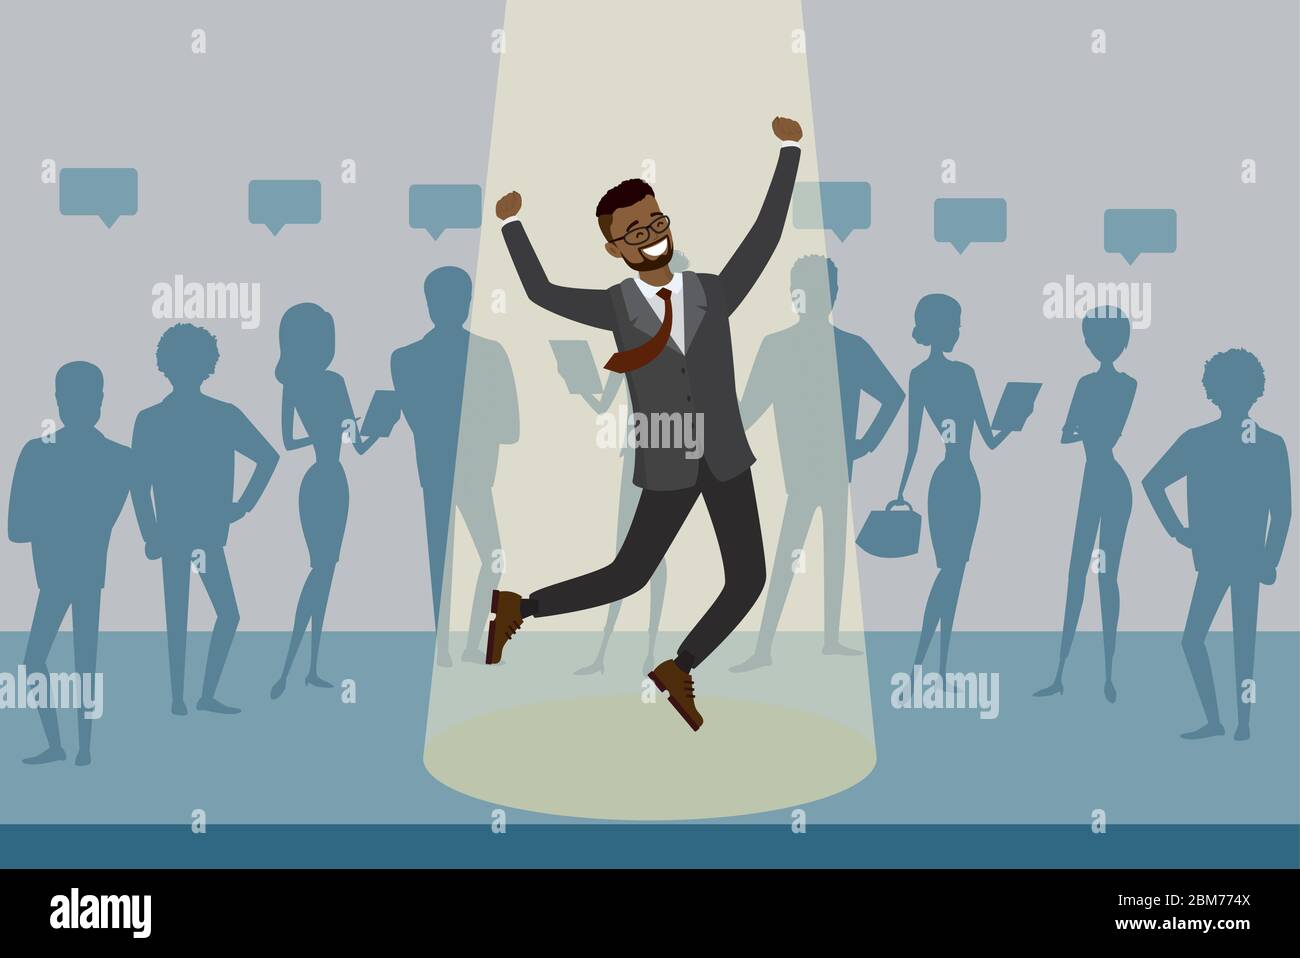 Cartoon afrian american job candidate won and jumps in spotlight, human resource recruitment concept,silhouettes of people on the background,flat vect Stock Vector